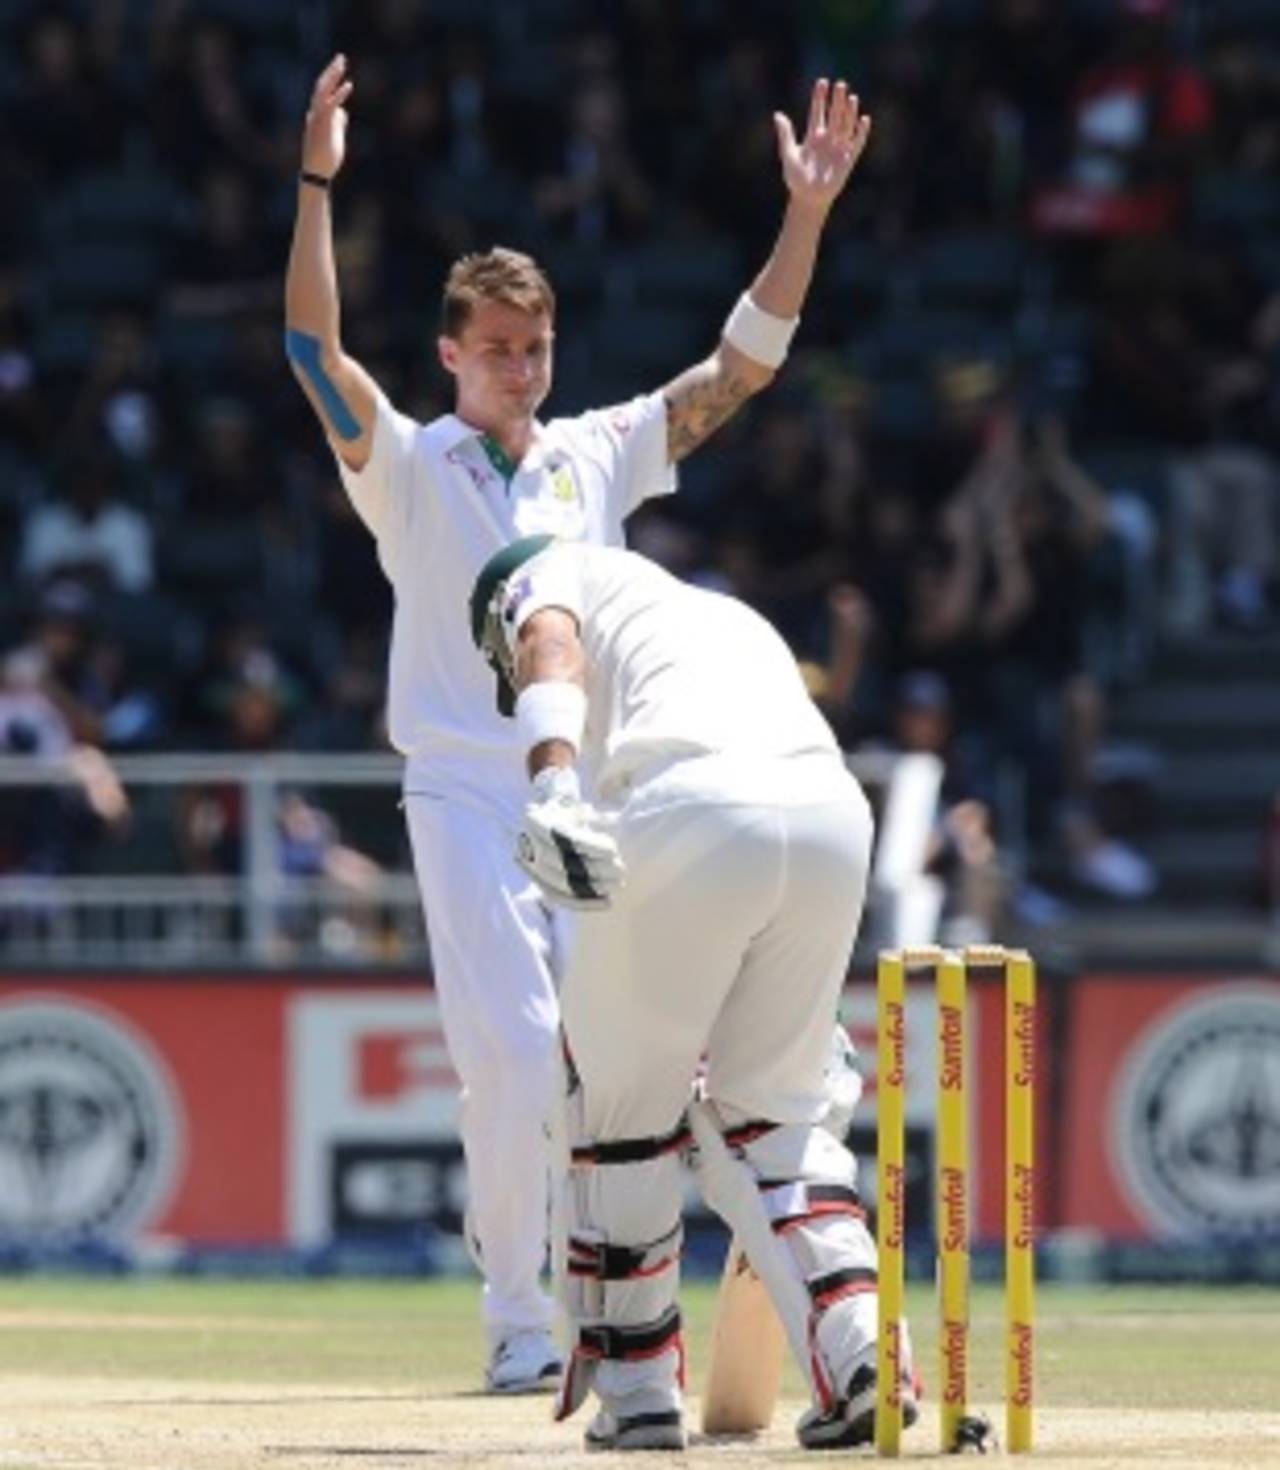 Dale Steyn: If his figures were taken to an ice-skating rink, they could do a cantilever-triple axel-backflip while reciting the names of United Nations secretary-generals in Entish&nbsp;&nbsp;&bull;&nbsp;&nbsp;AFP